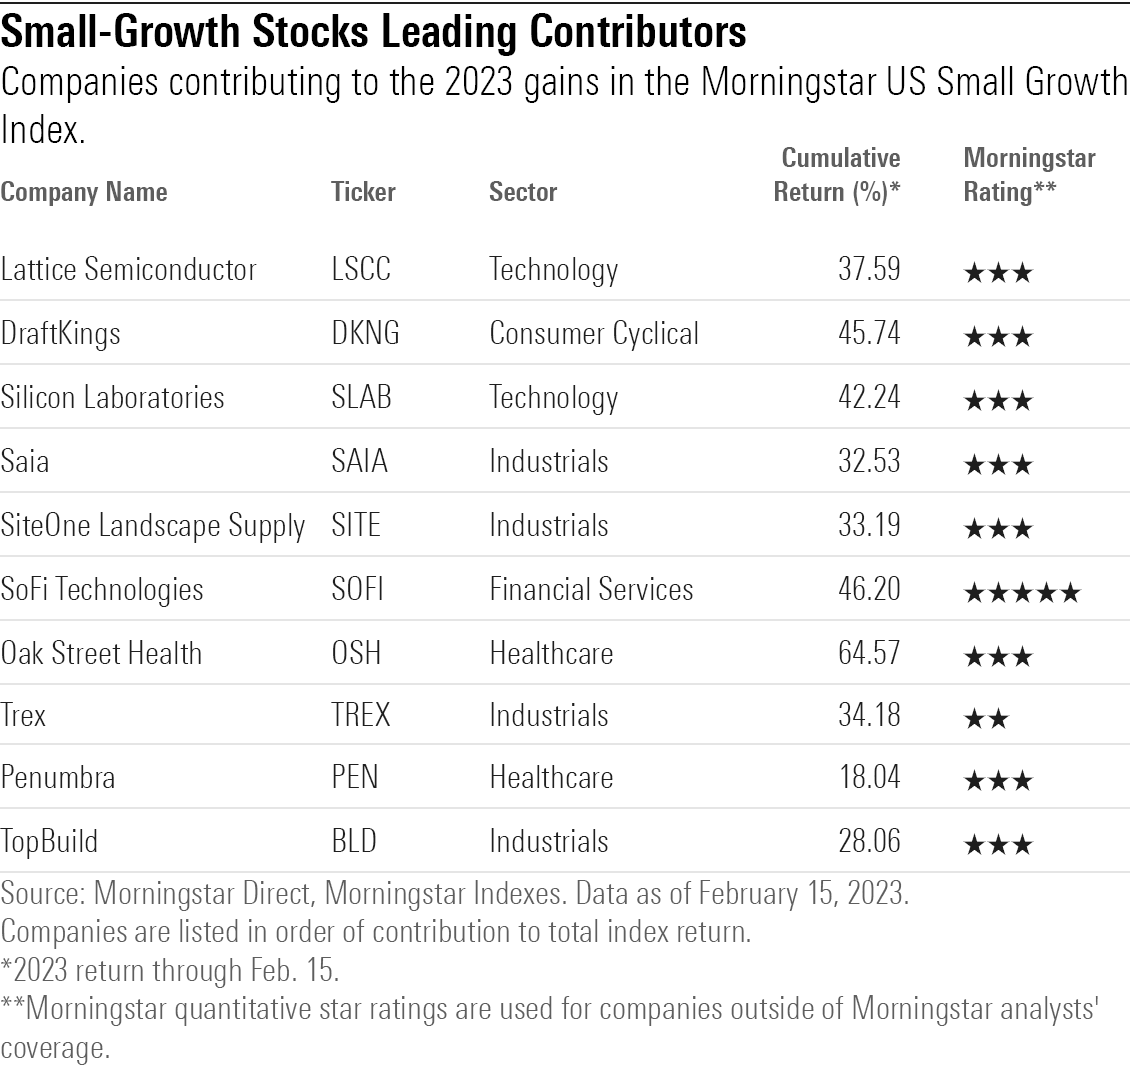 list of top performing stocks in the Morningstar US Small Growth Index.